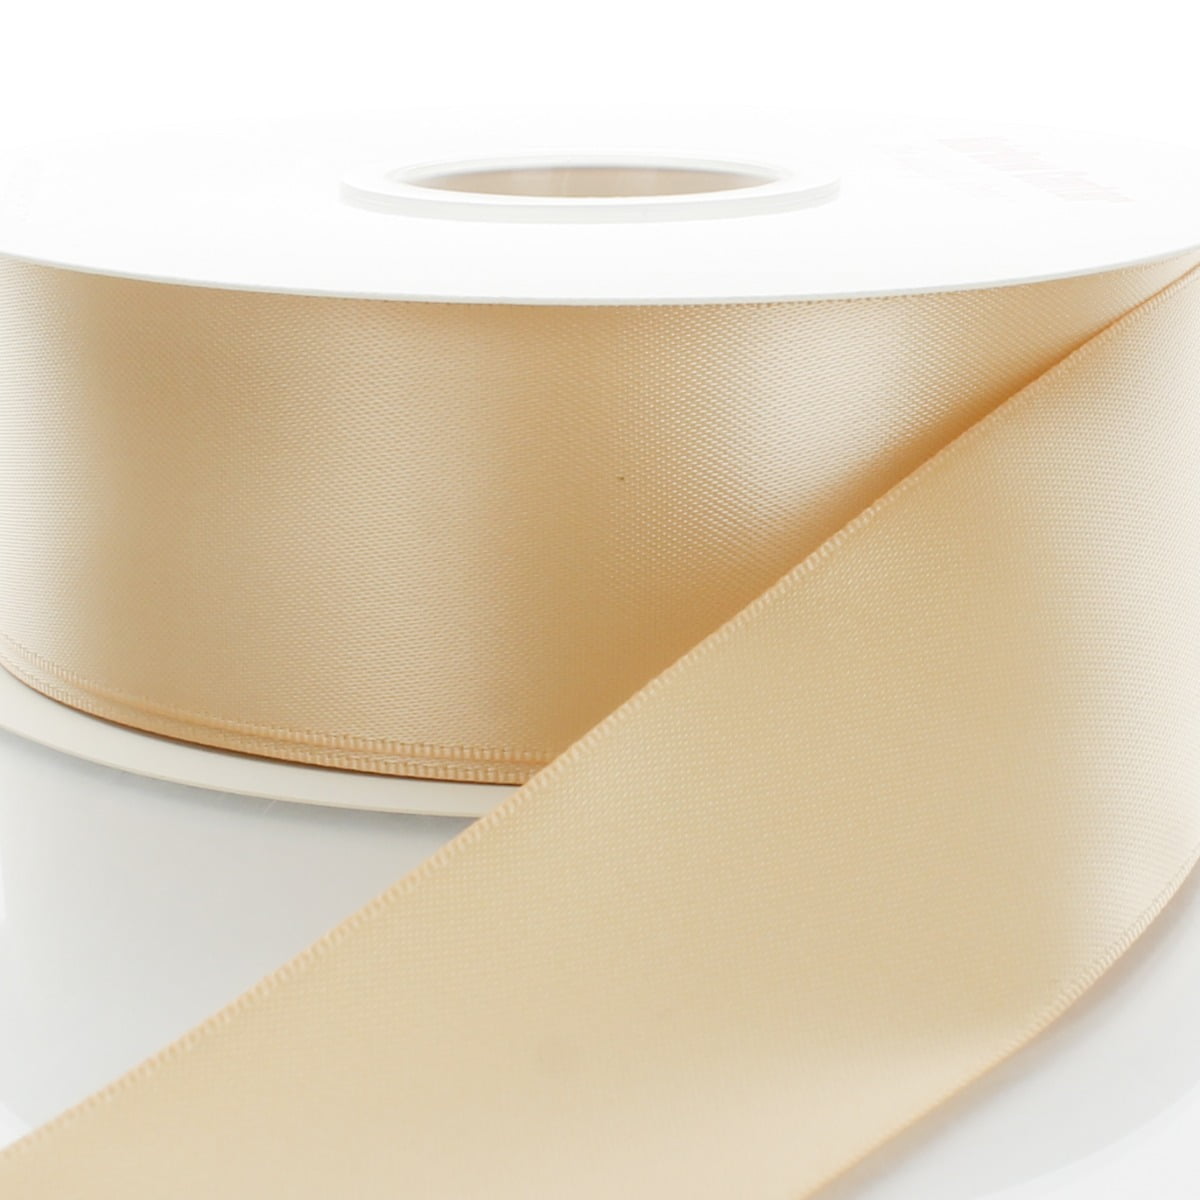 Luscious Double Faced Satin Ribbon Holiday Decorating Yellow Gold and White  2 Wide by 3 Yard Length 